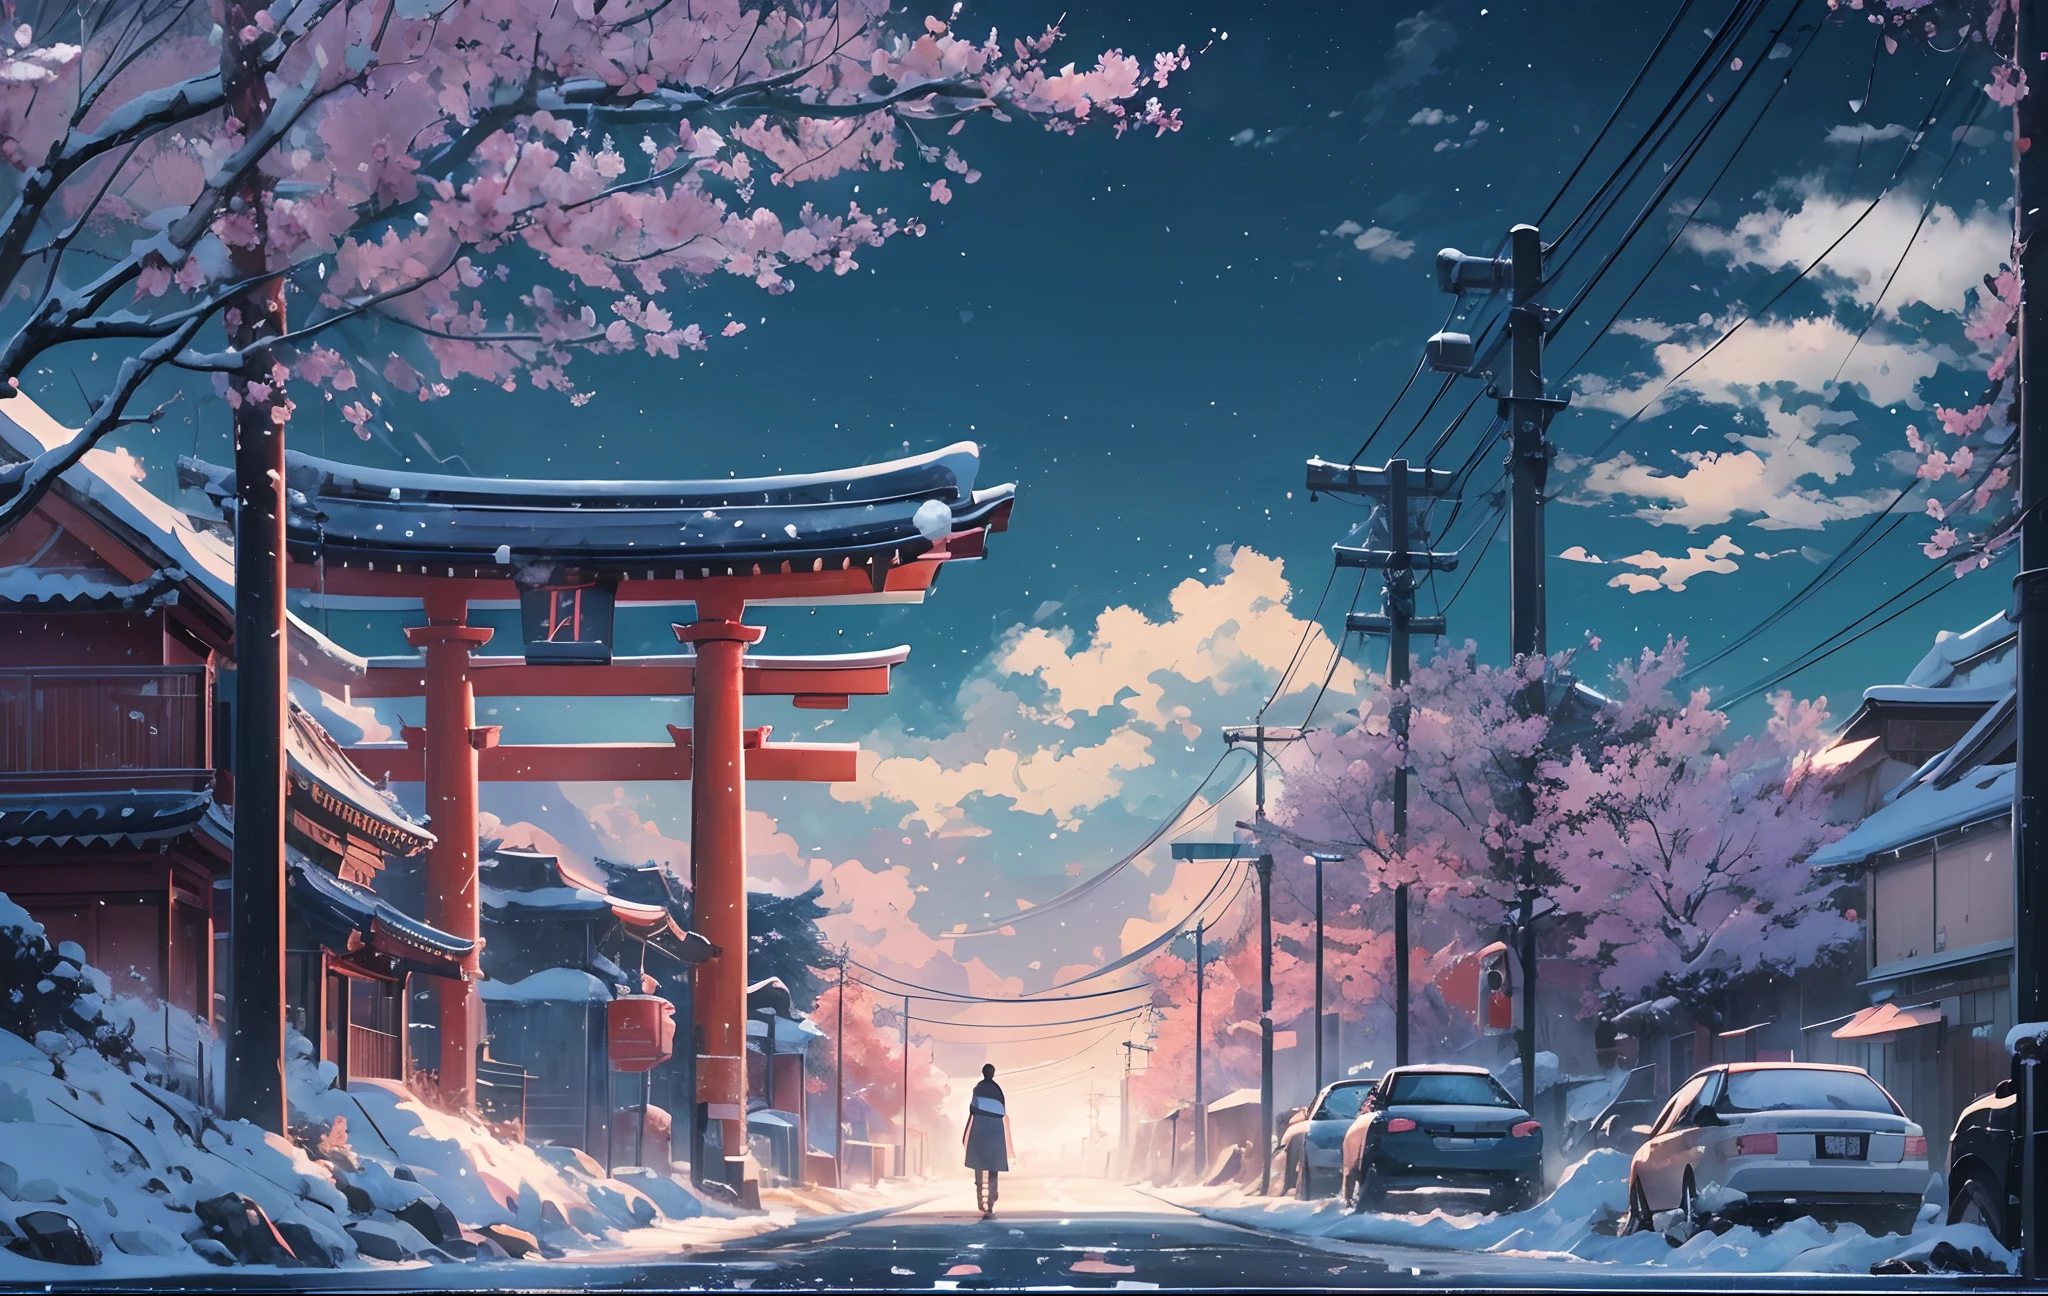 masterpiece, concept art, wide shot, panoramic, (a street full of graffiti at night with a torii gate in the distance), (winter), snowy, a detailed matte painting, by Makoto Shinkai, widescreen shot, driveway, sakura trees-lined path, miyazaki's animated film, endless night, sakura trees along street, art for the film in color, detailed digital anime art, (epic composition, epic proportion), HD